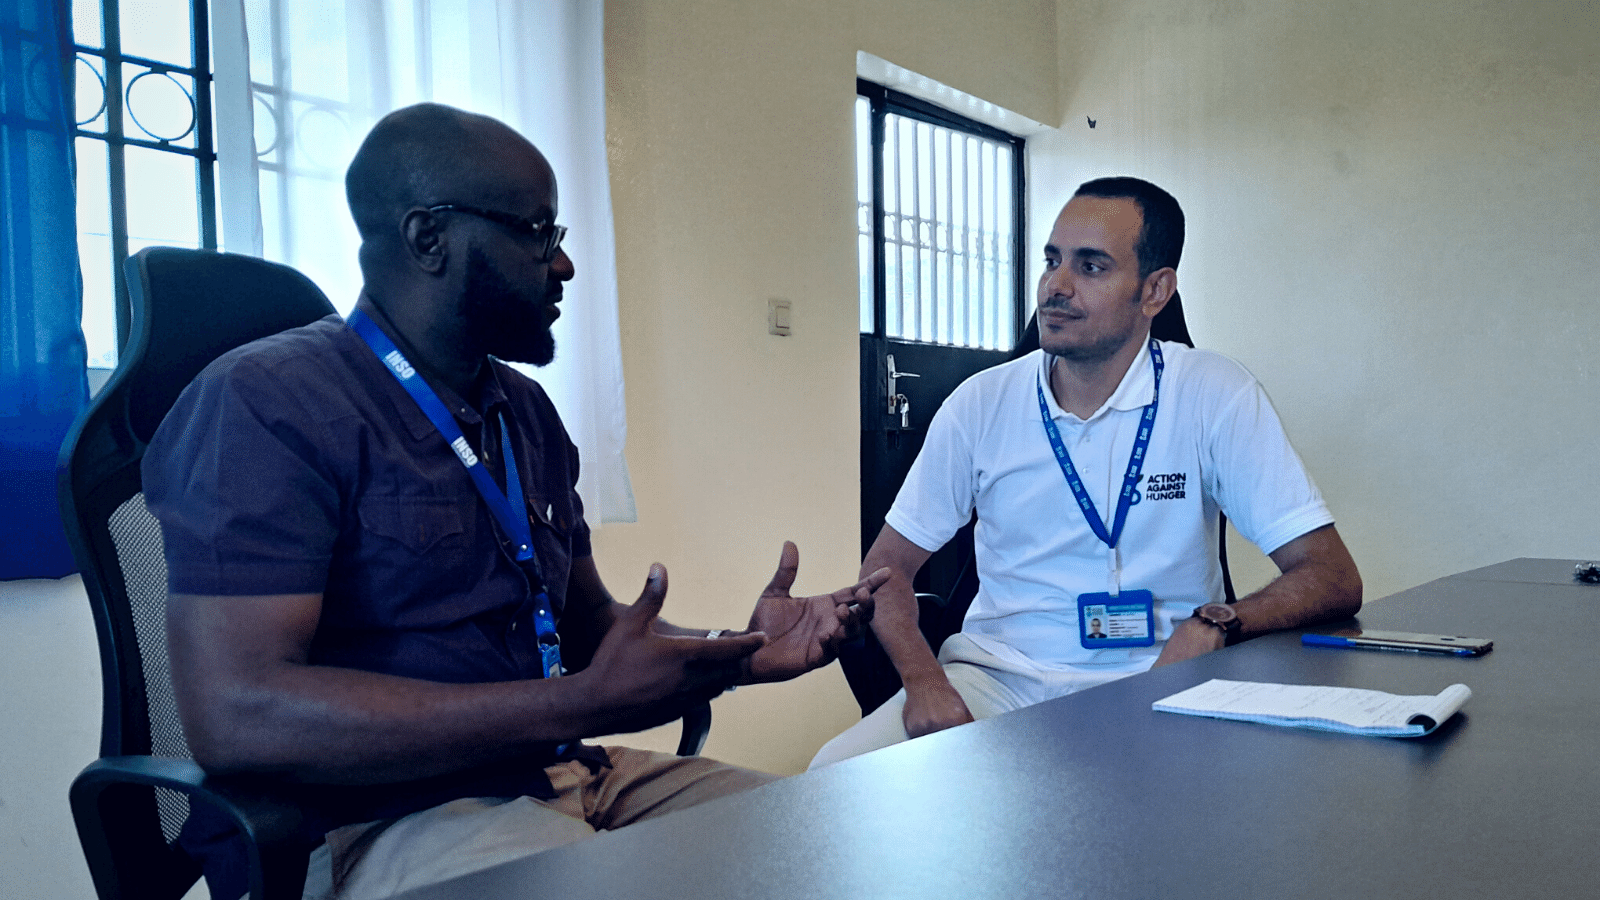 INSO Safety Advisor discussing with a staff member of an NGO